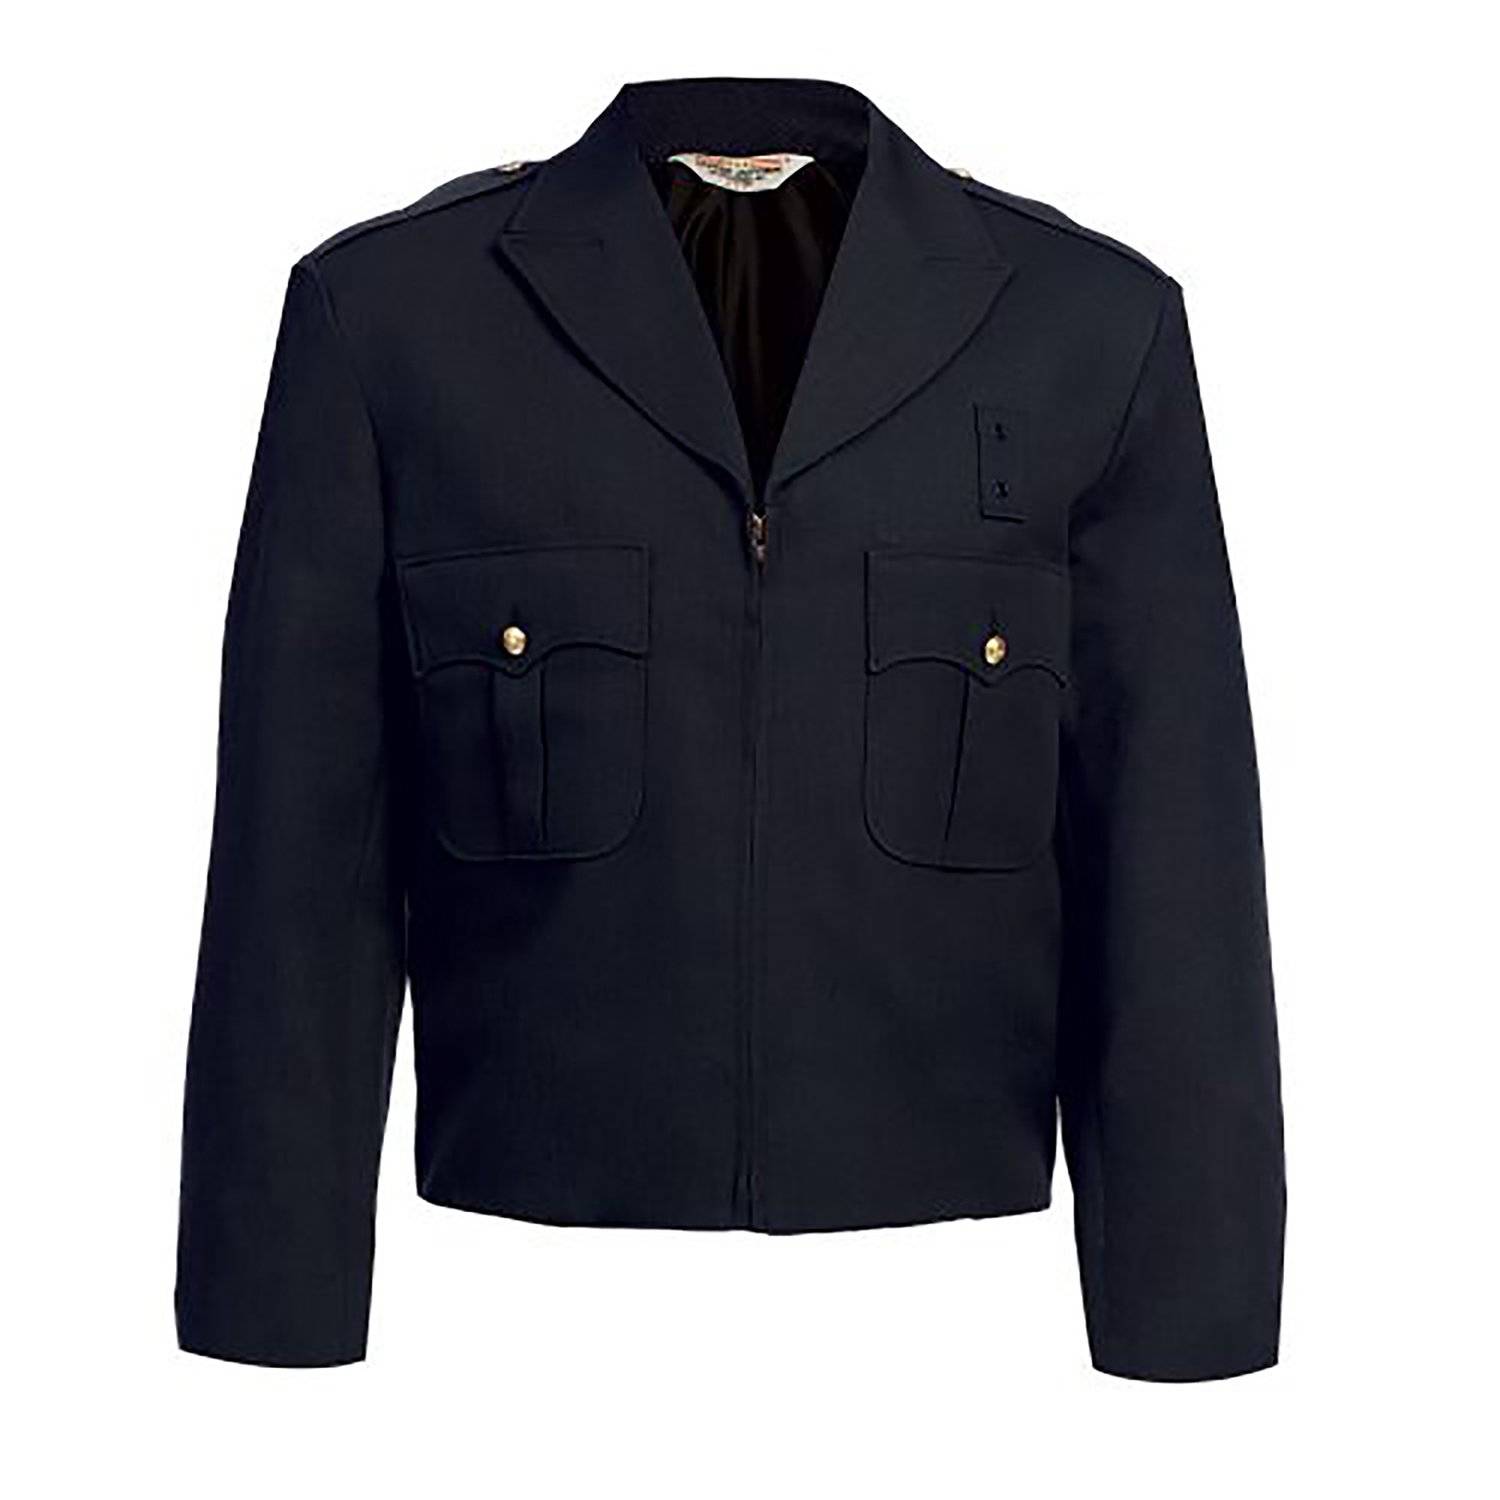 United Uniform Zippered Front Ike Jacket Polyester and Wool